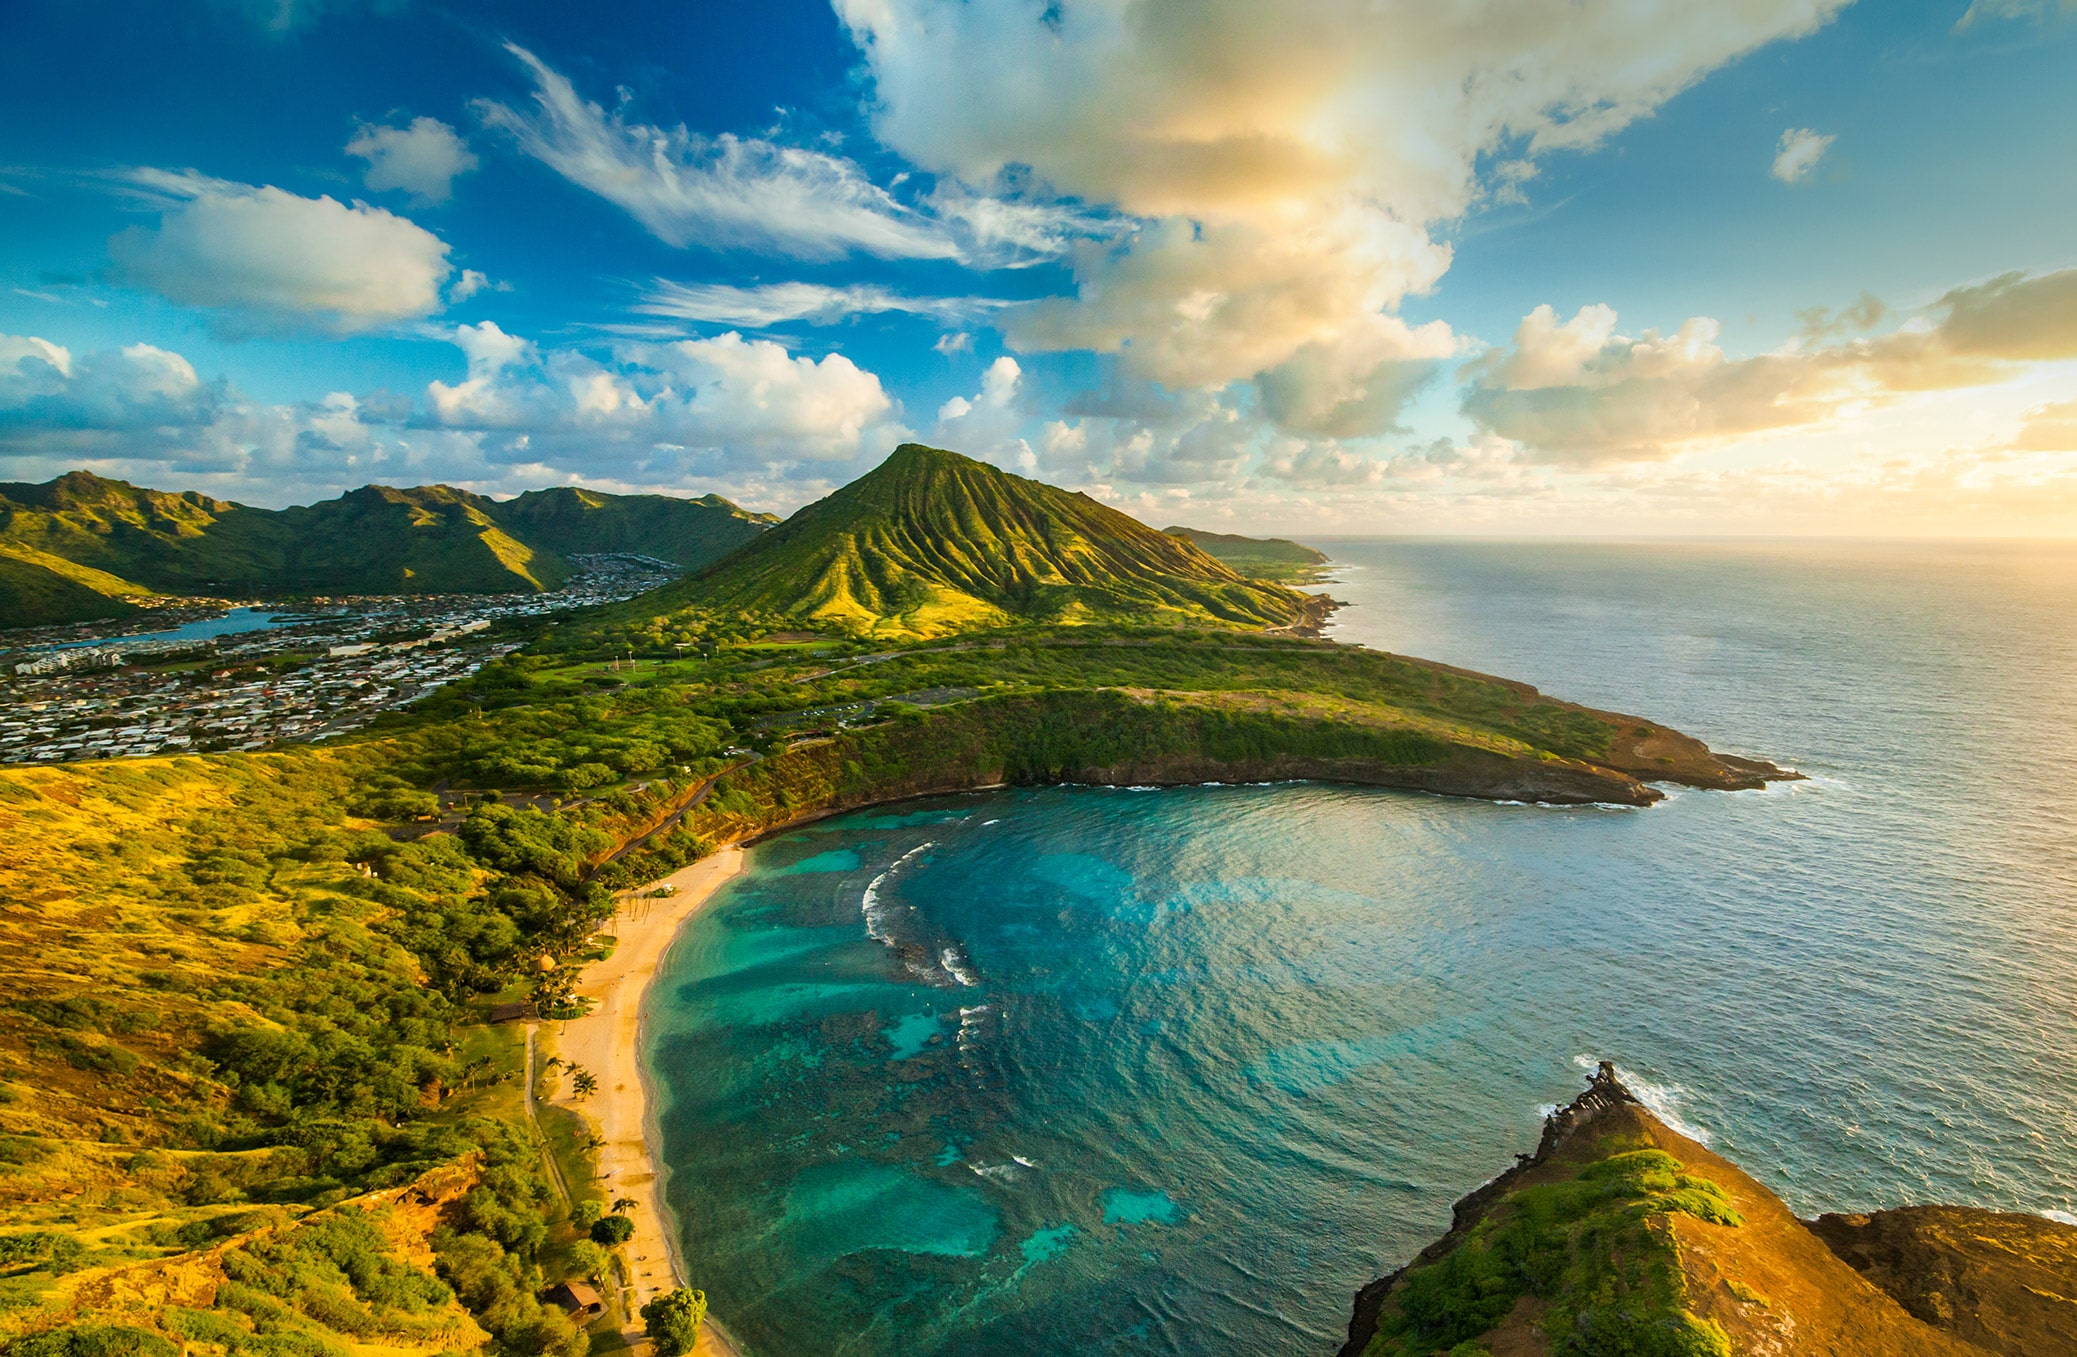 What to see in Oahu